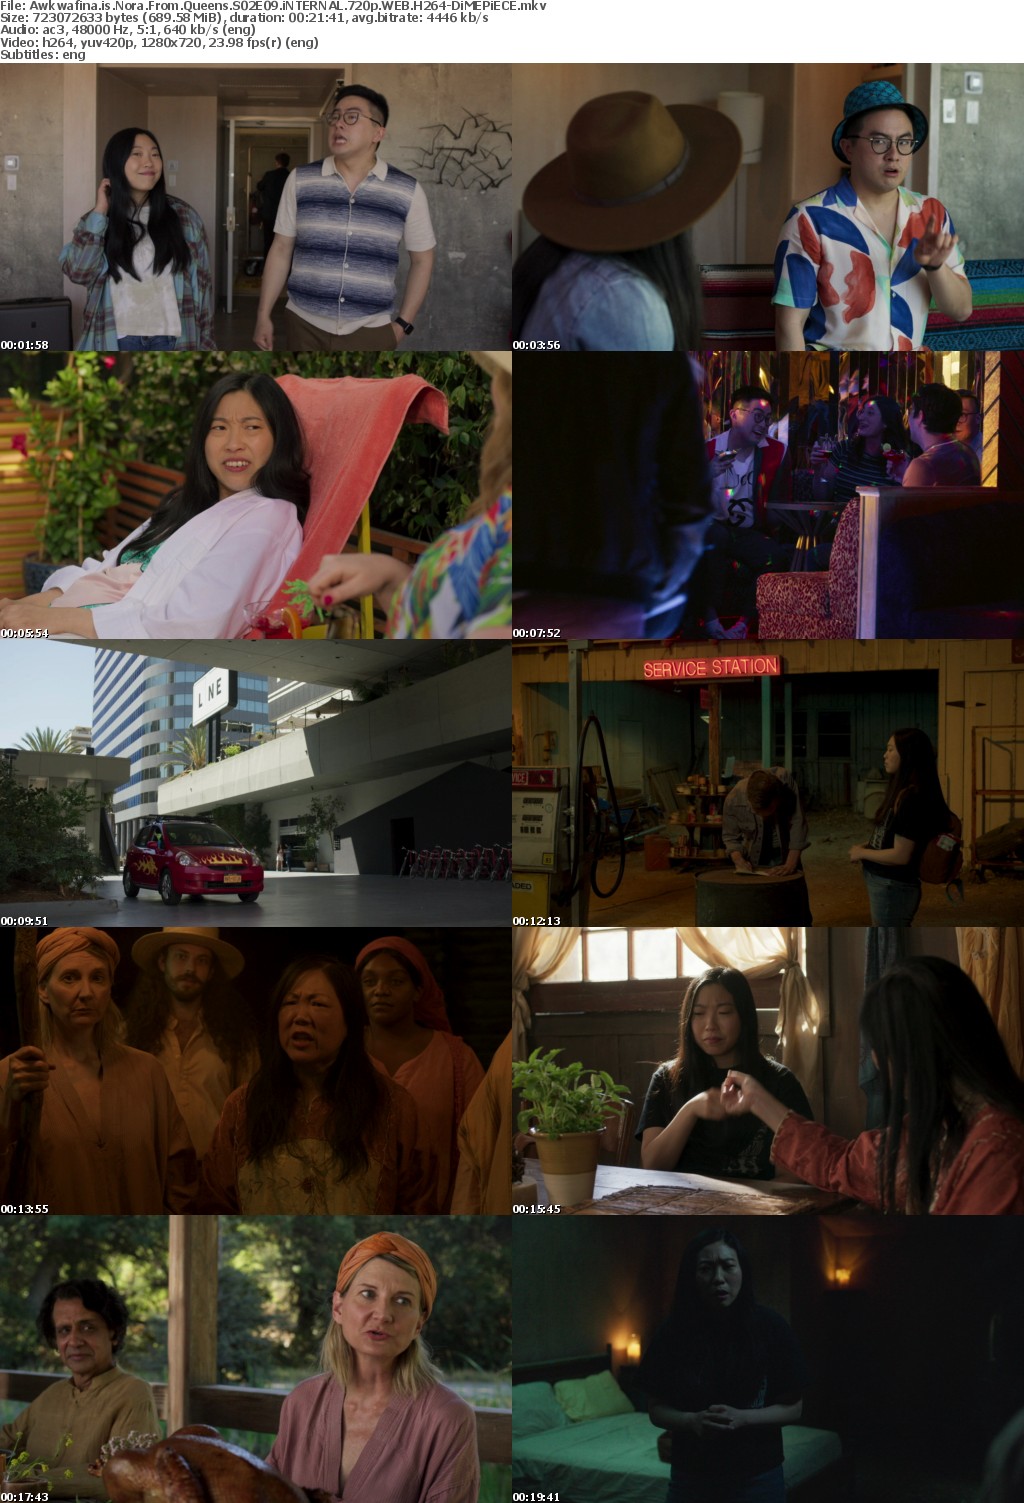 Awkwafina is Nora From Queens S02E09 iNTERNAL 720p WEB H264-DiMEPiECE